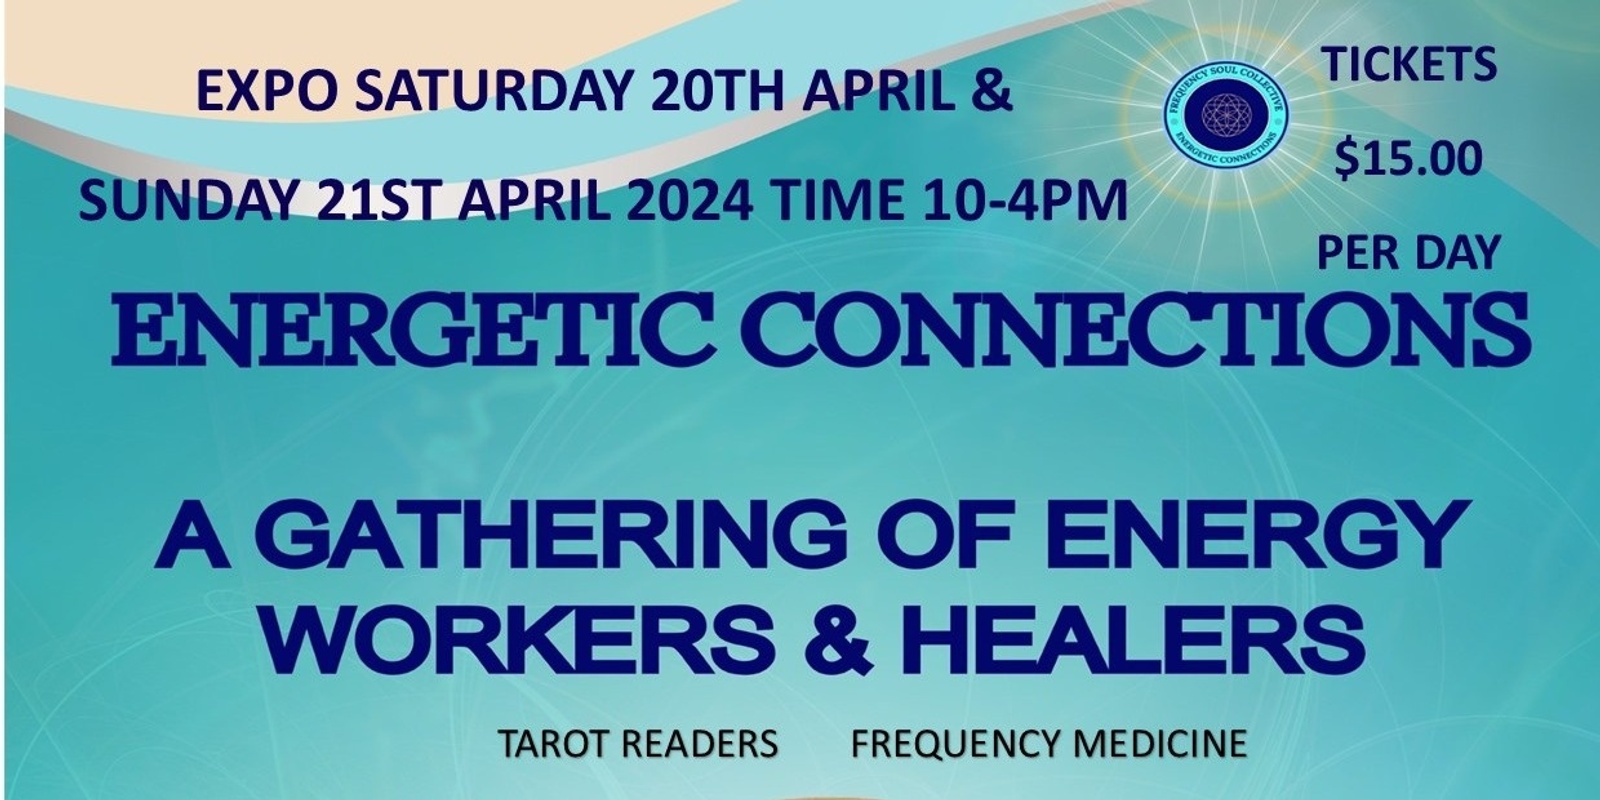 Banner image for Energetic Connections Expo & High Tea Saturday 20th April & Sunday 21st April - 10am - 4pm